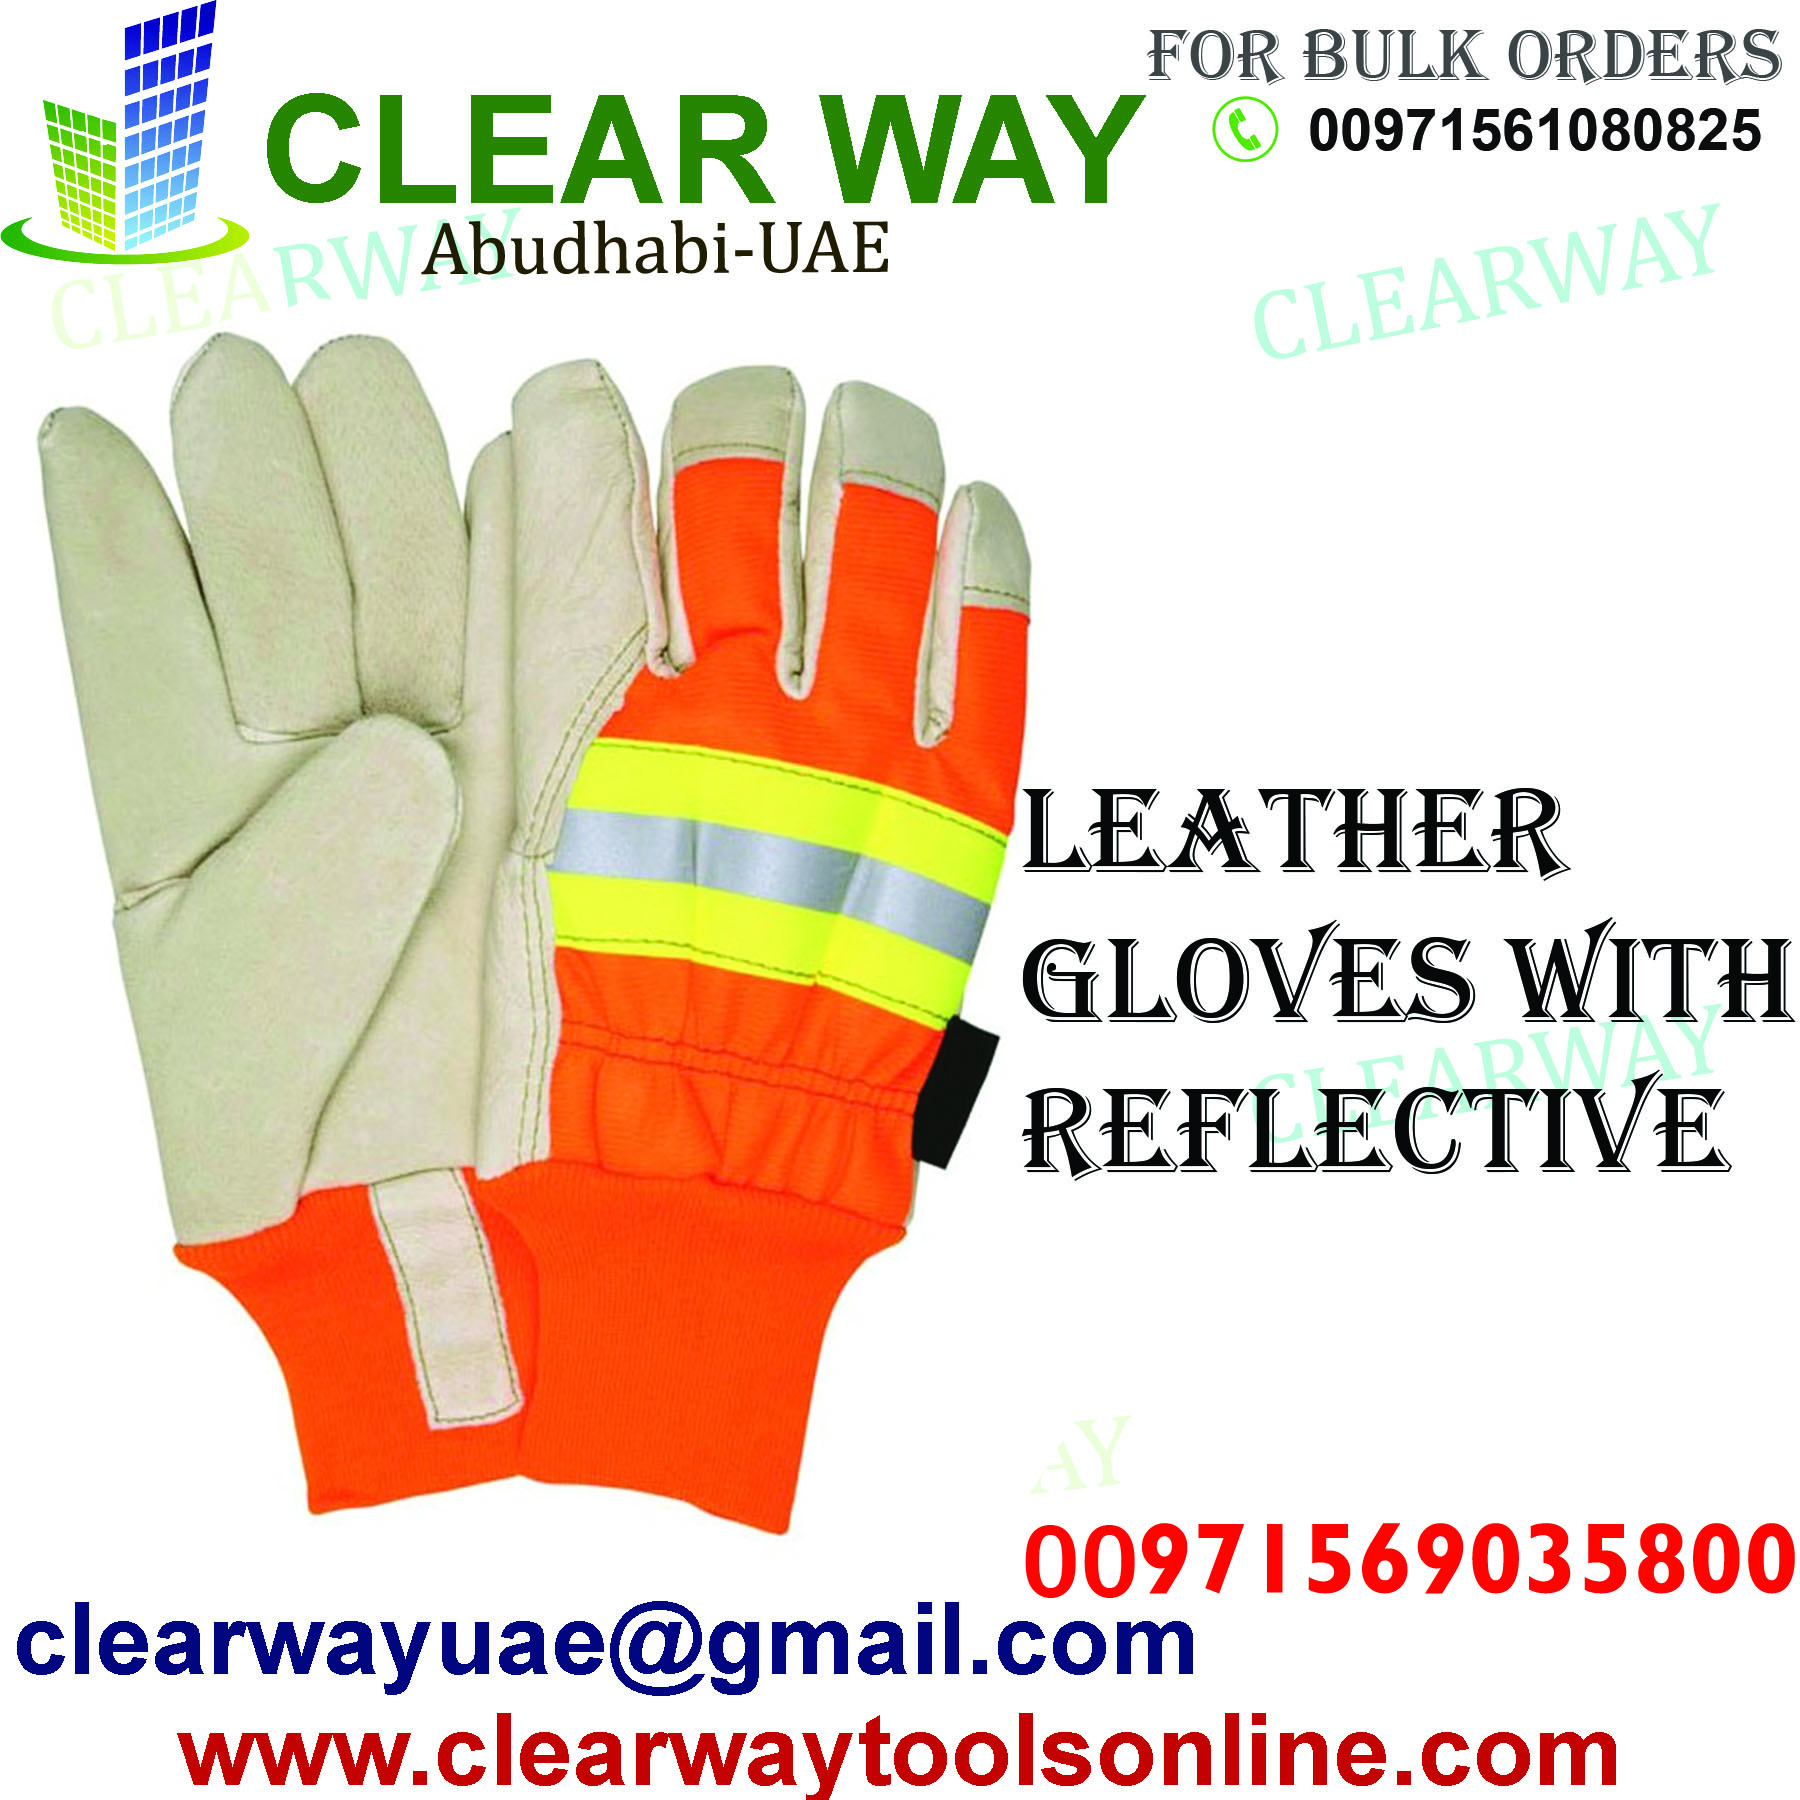 LEATHER GLOVES WITH REFLECTIVE DEALER IN MUSSAFAH ABUDHABI UAE CLEARWAY